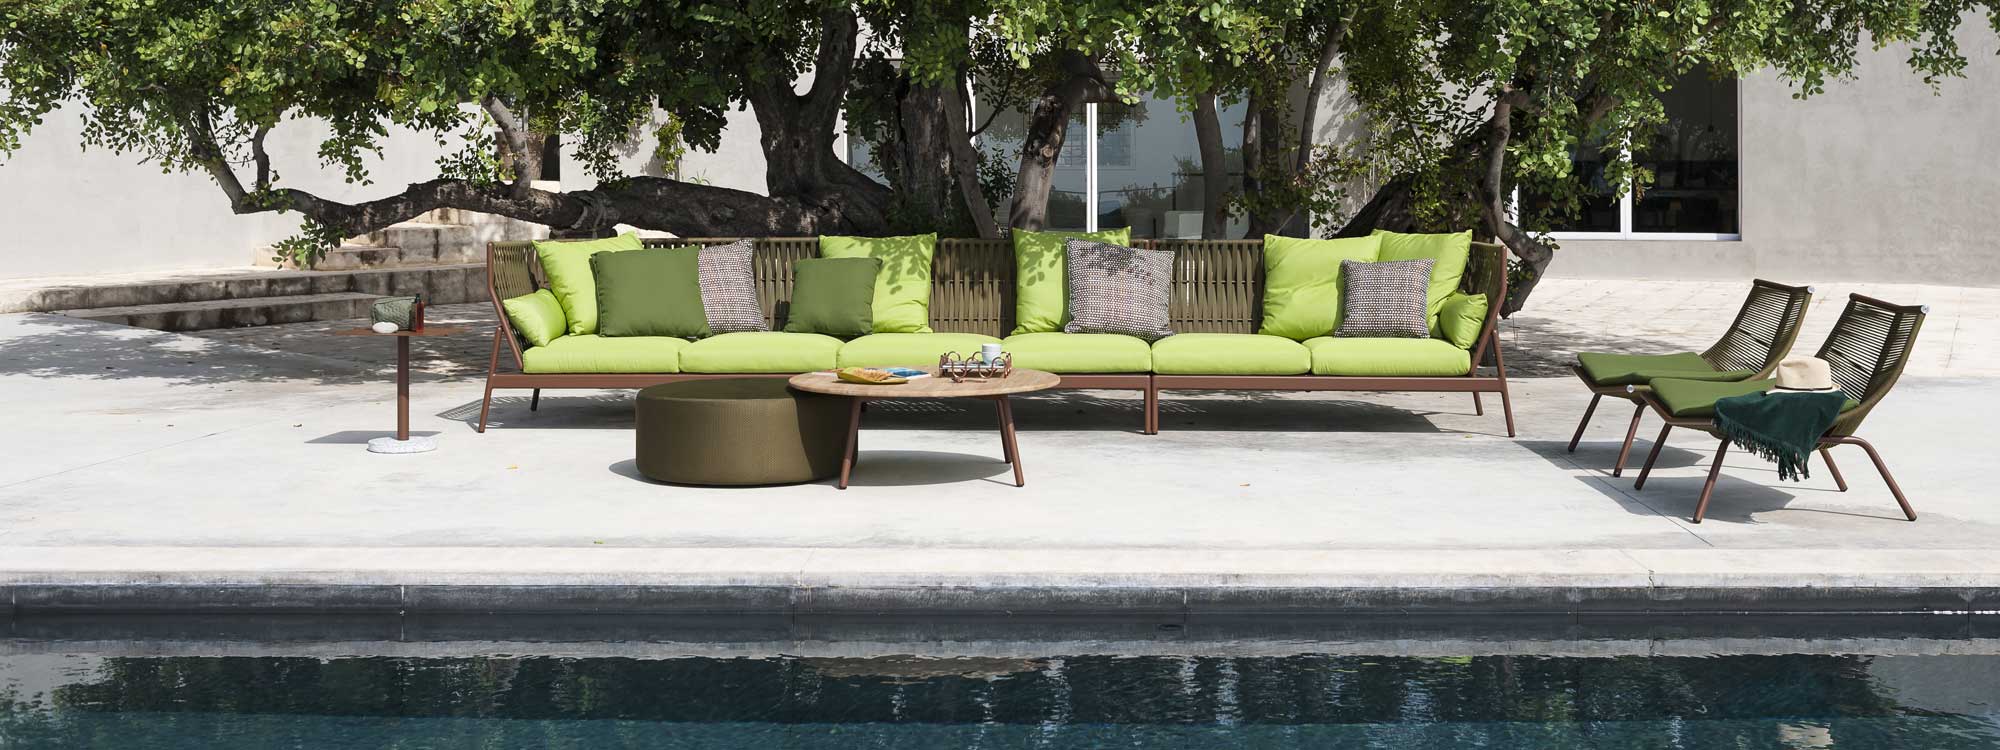 Piper modern garden sofa and Laze outdoor lounge chairs on poolside in front of large tree